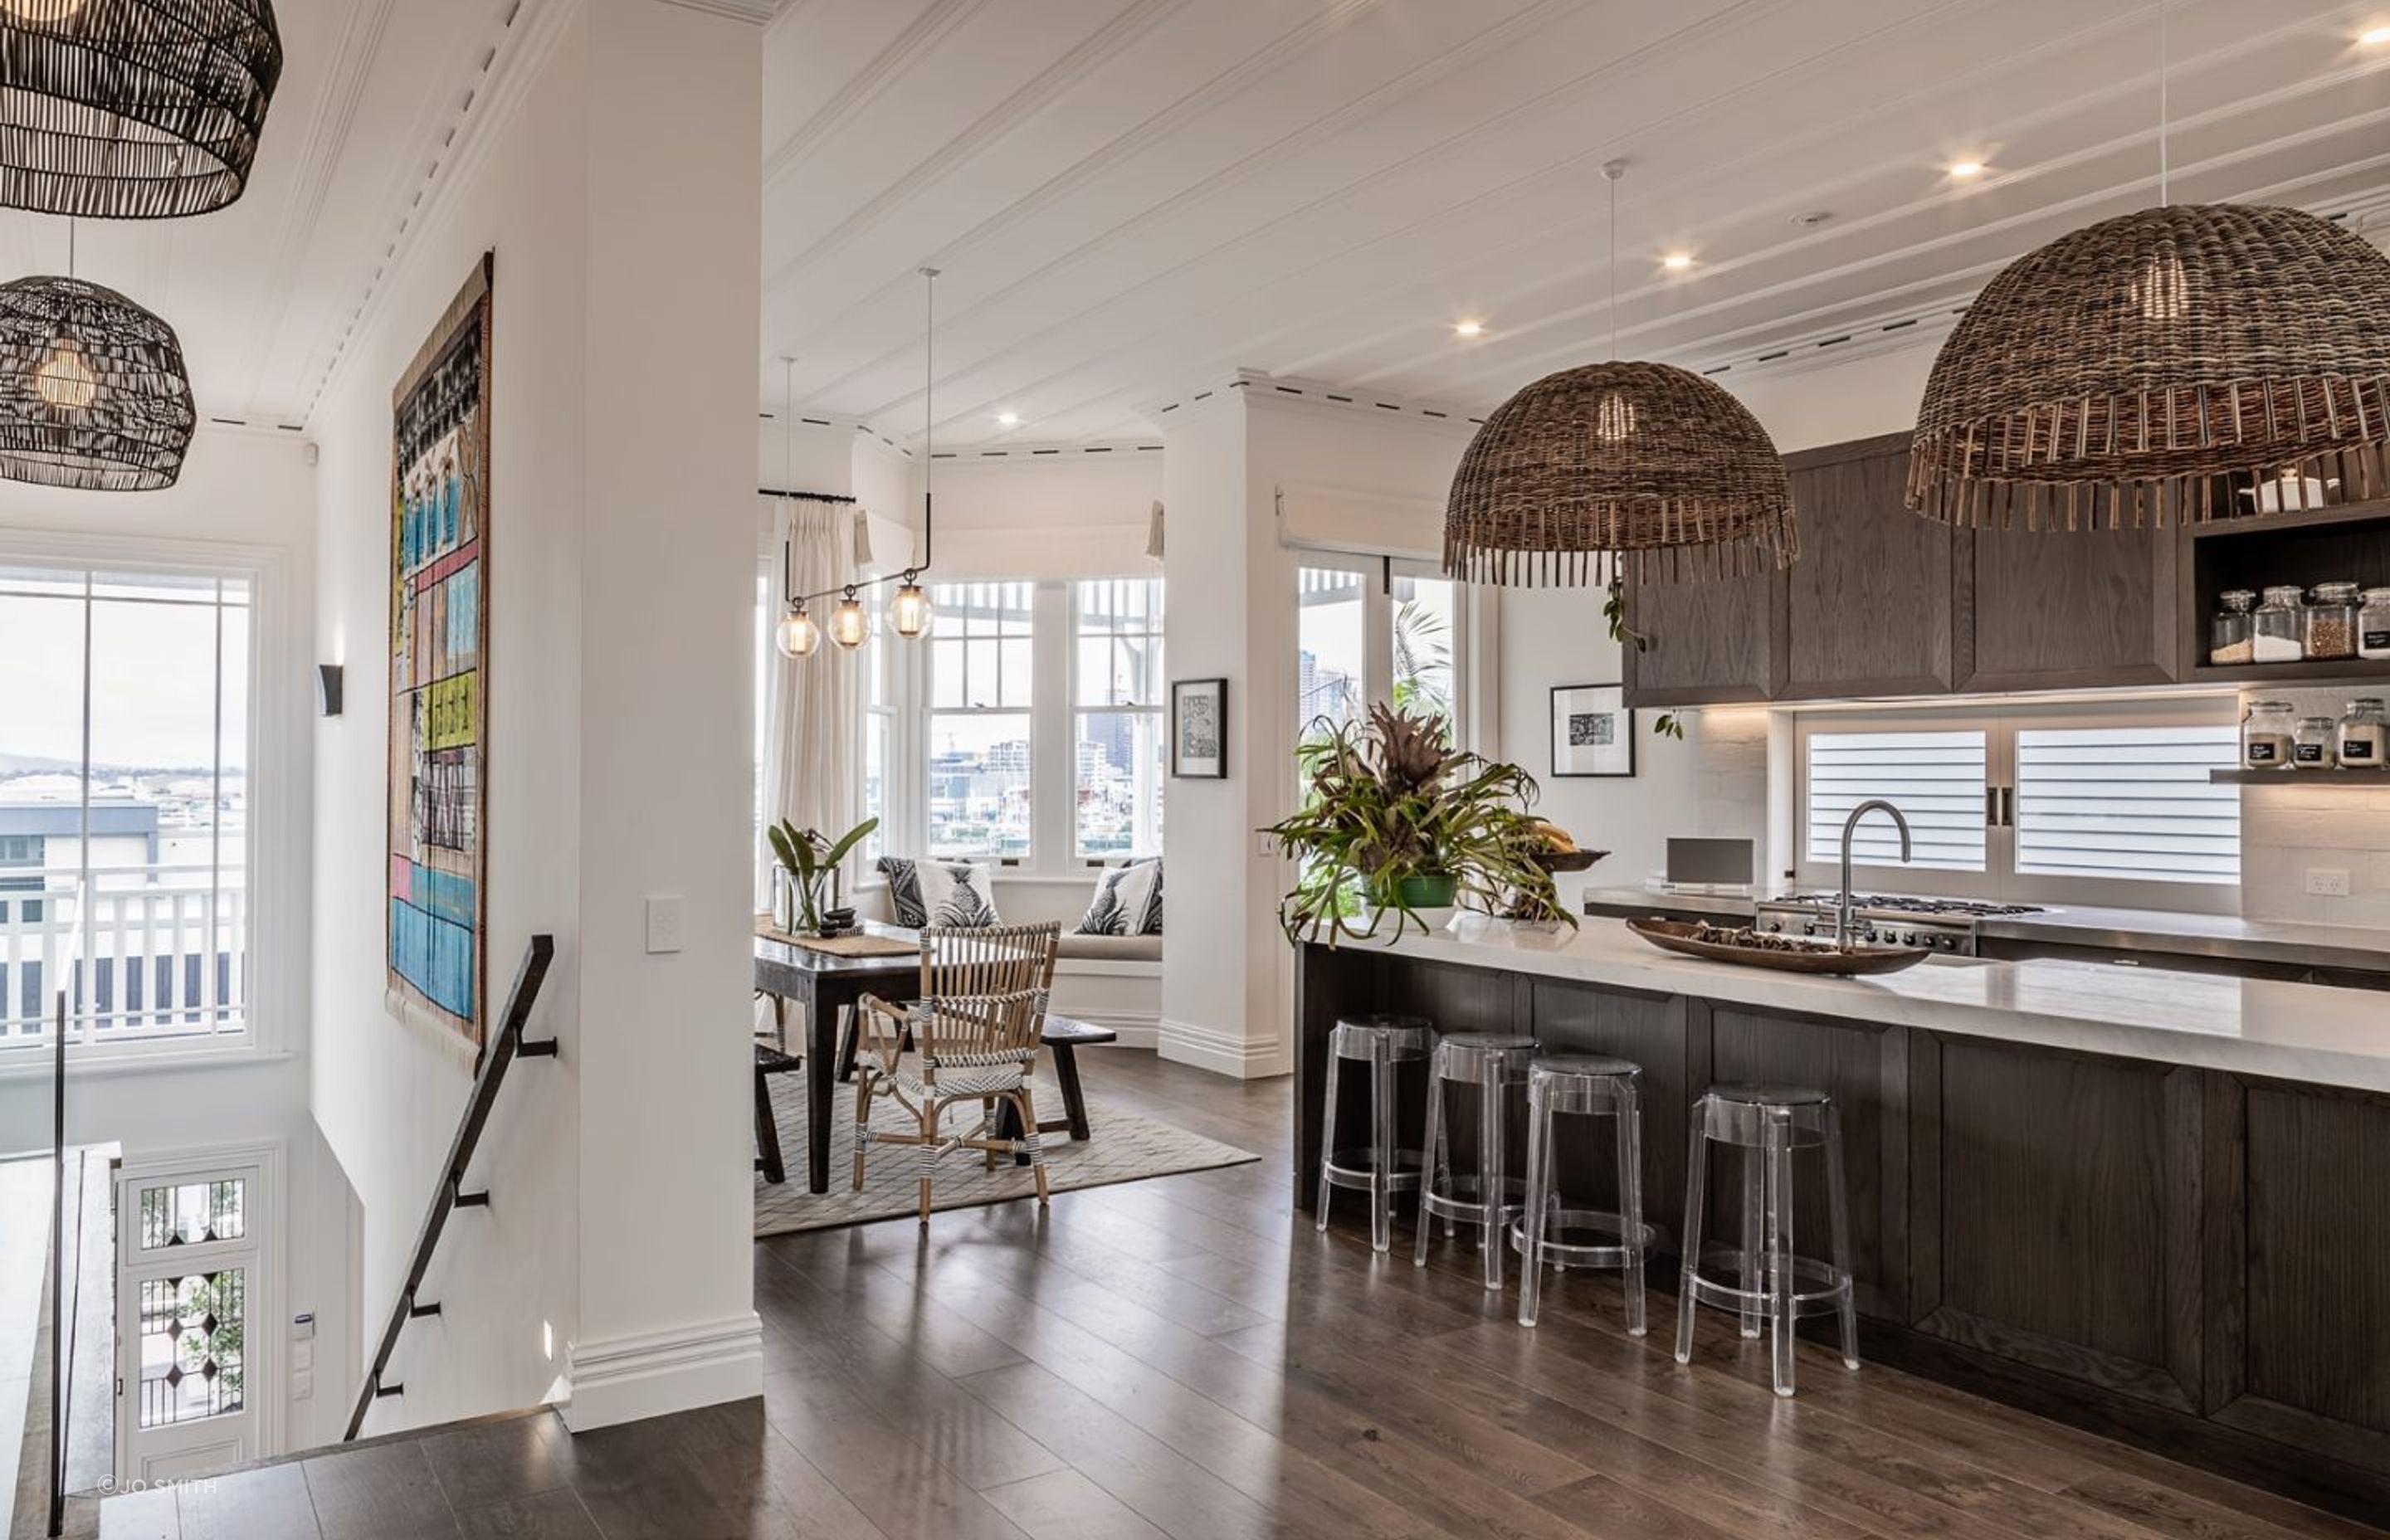 The open-plan kitchen and dining room leads to a bay window overlooking the city. An original board-and-batten ceiling, painted white to match the walls, provides a contrast to the dark oak flooring and cabinetry.